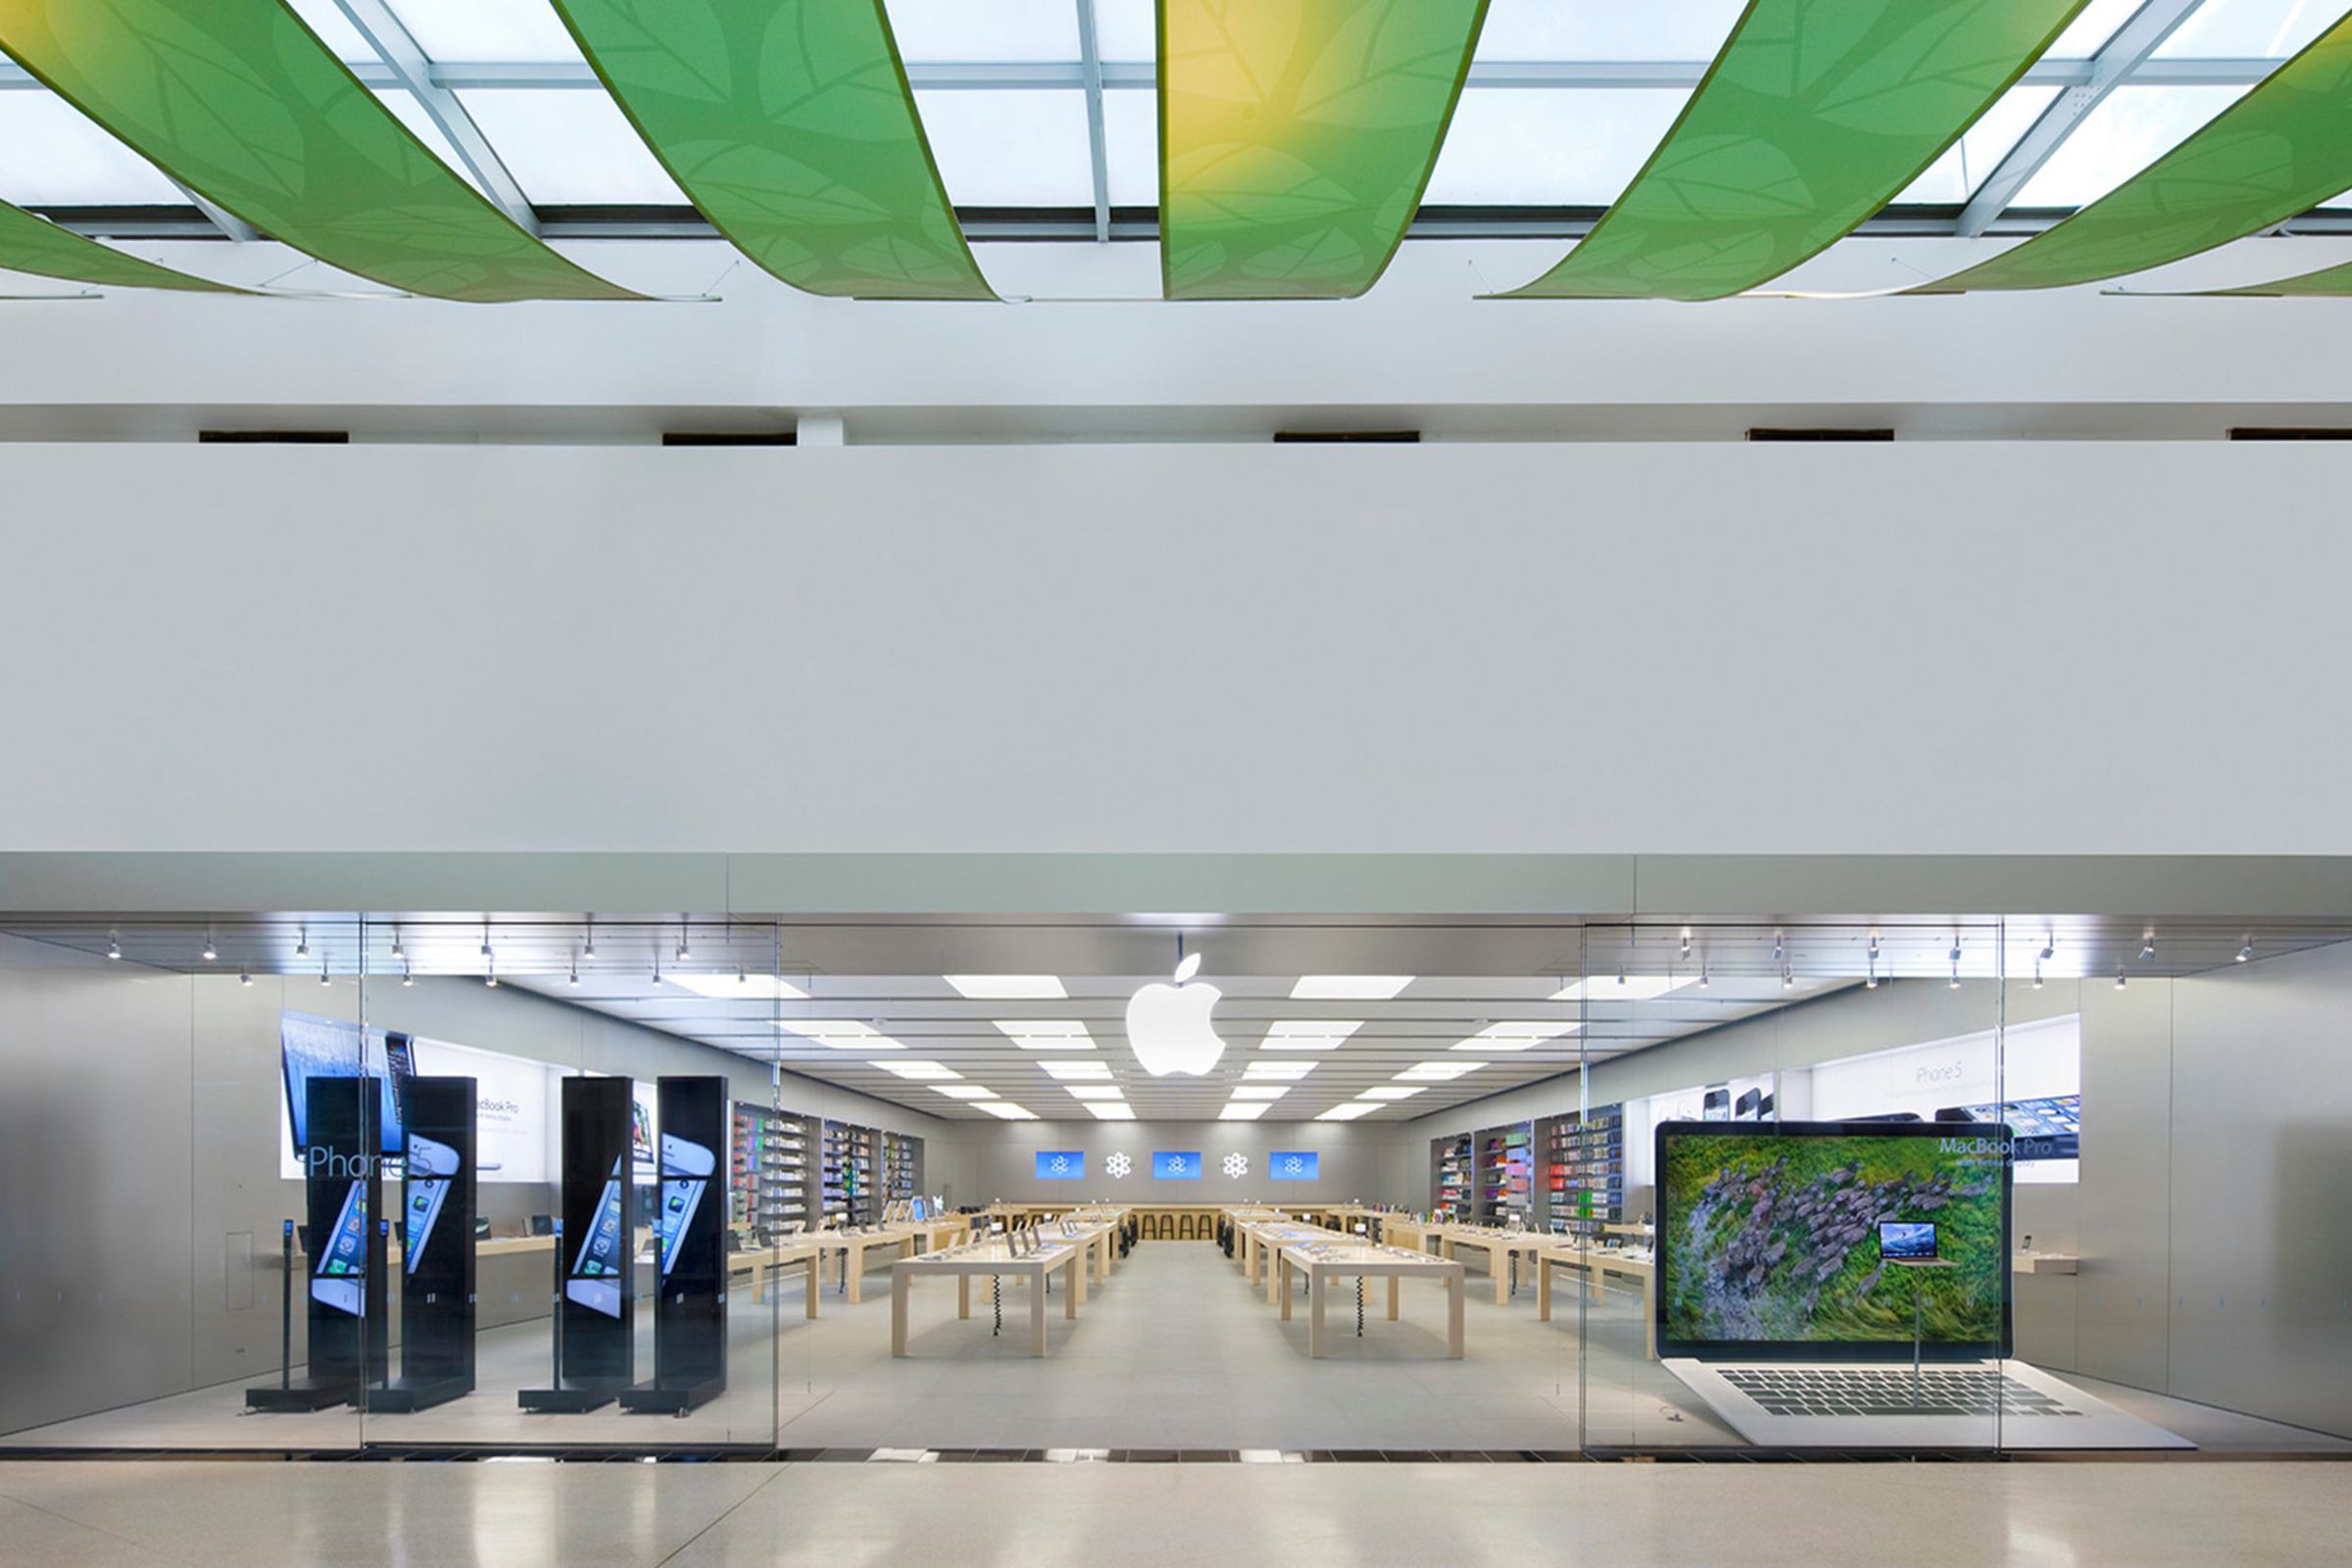 Employees at Apple’s Towson Town Center may soon be voting on whether to unionize.